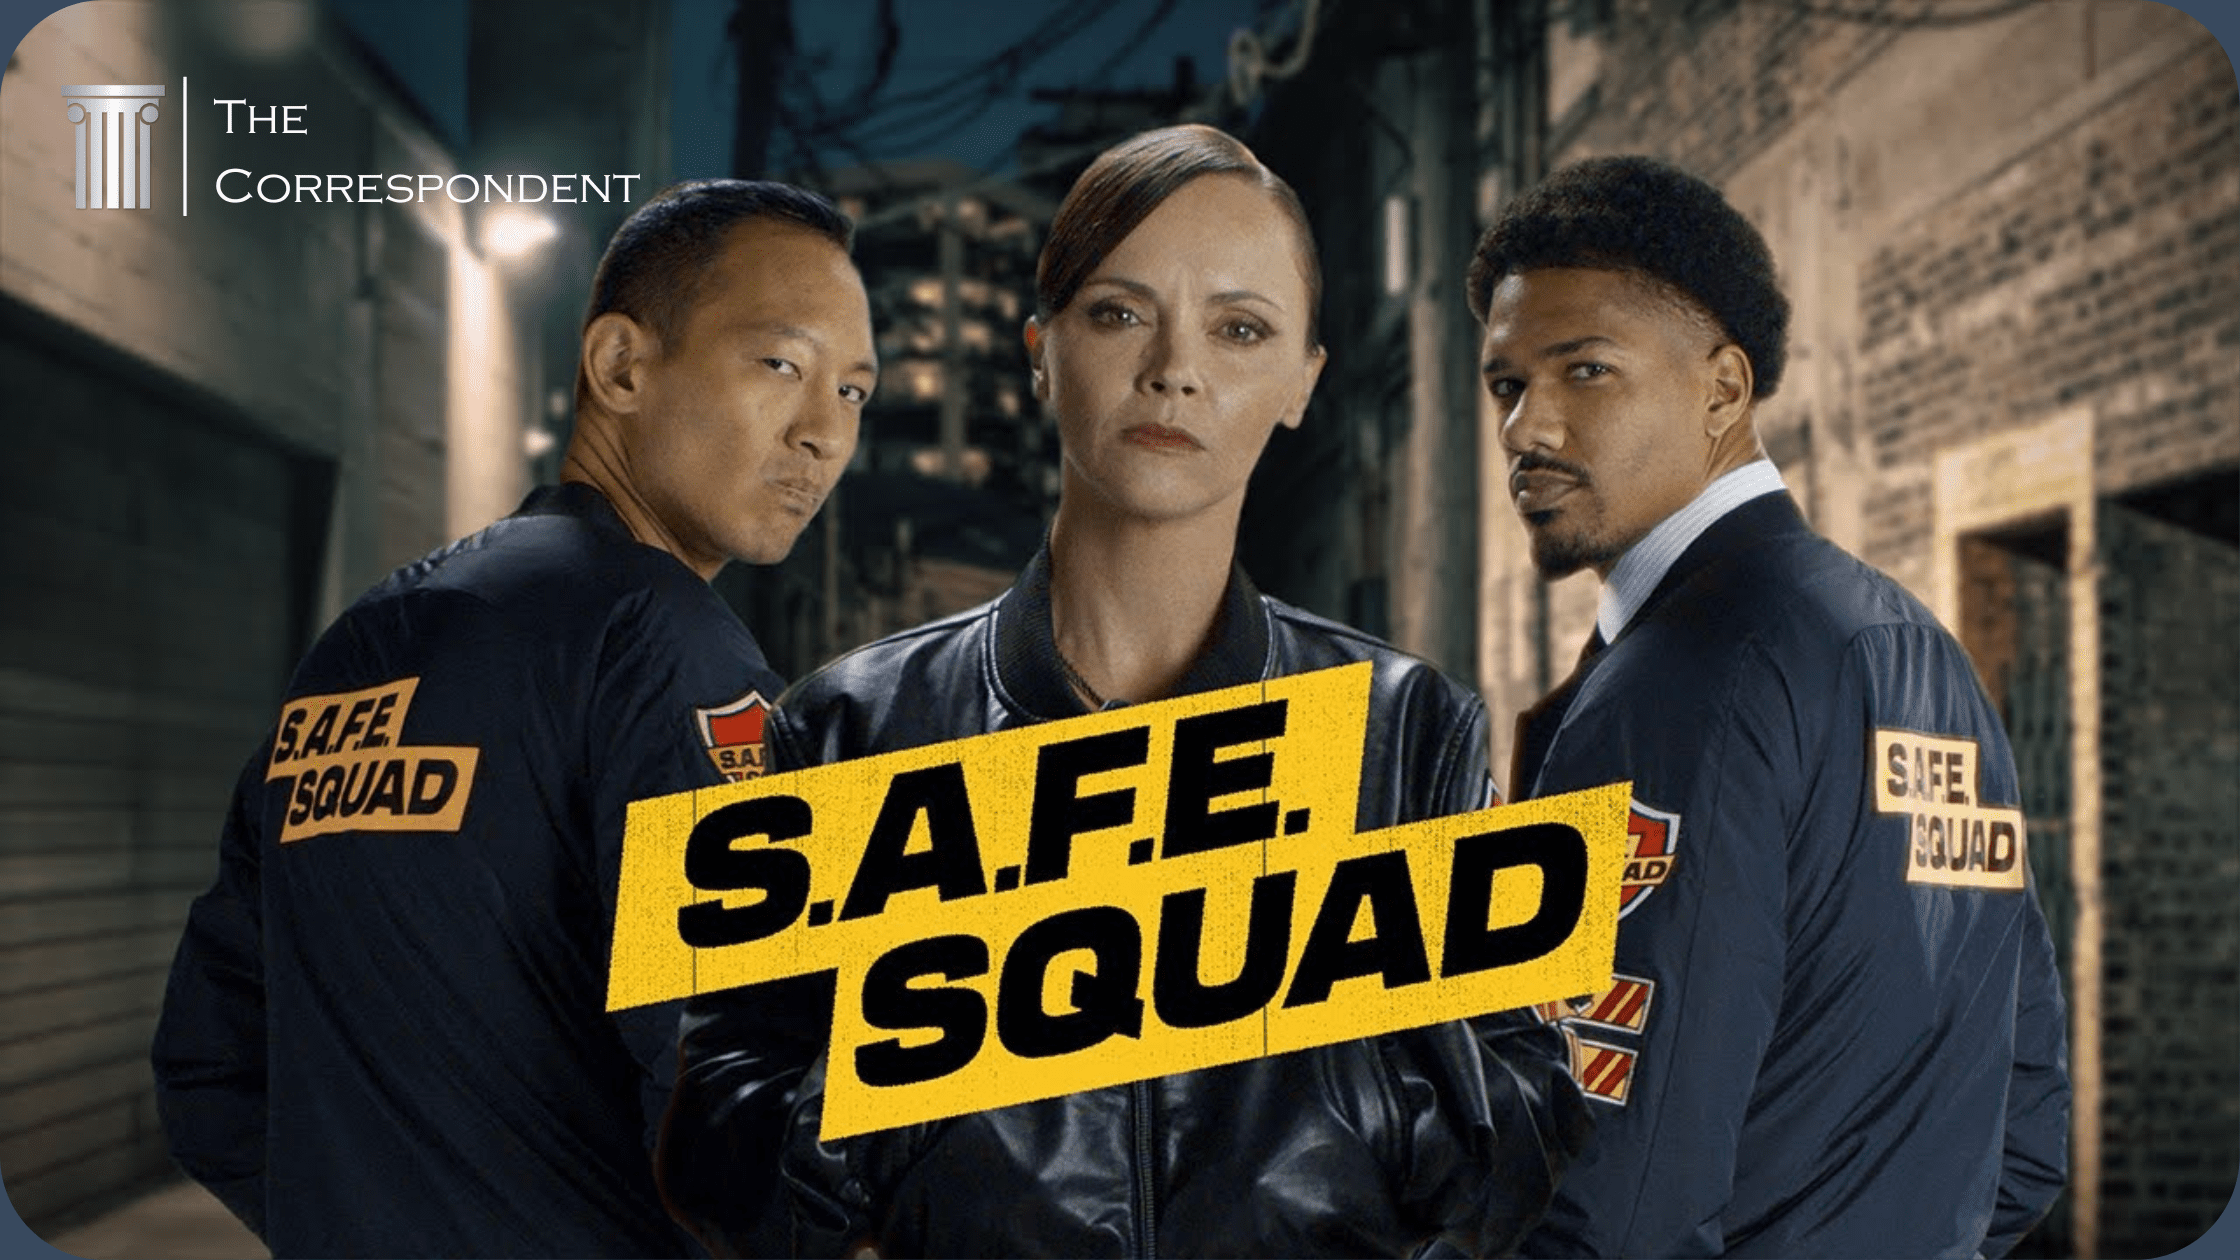 4 Marketing Lessons for Community Banks from Zelles SAFE Squad Campaign